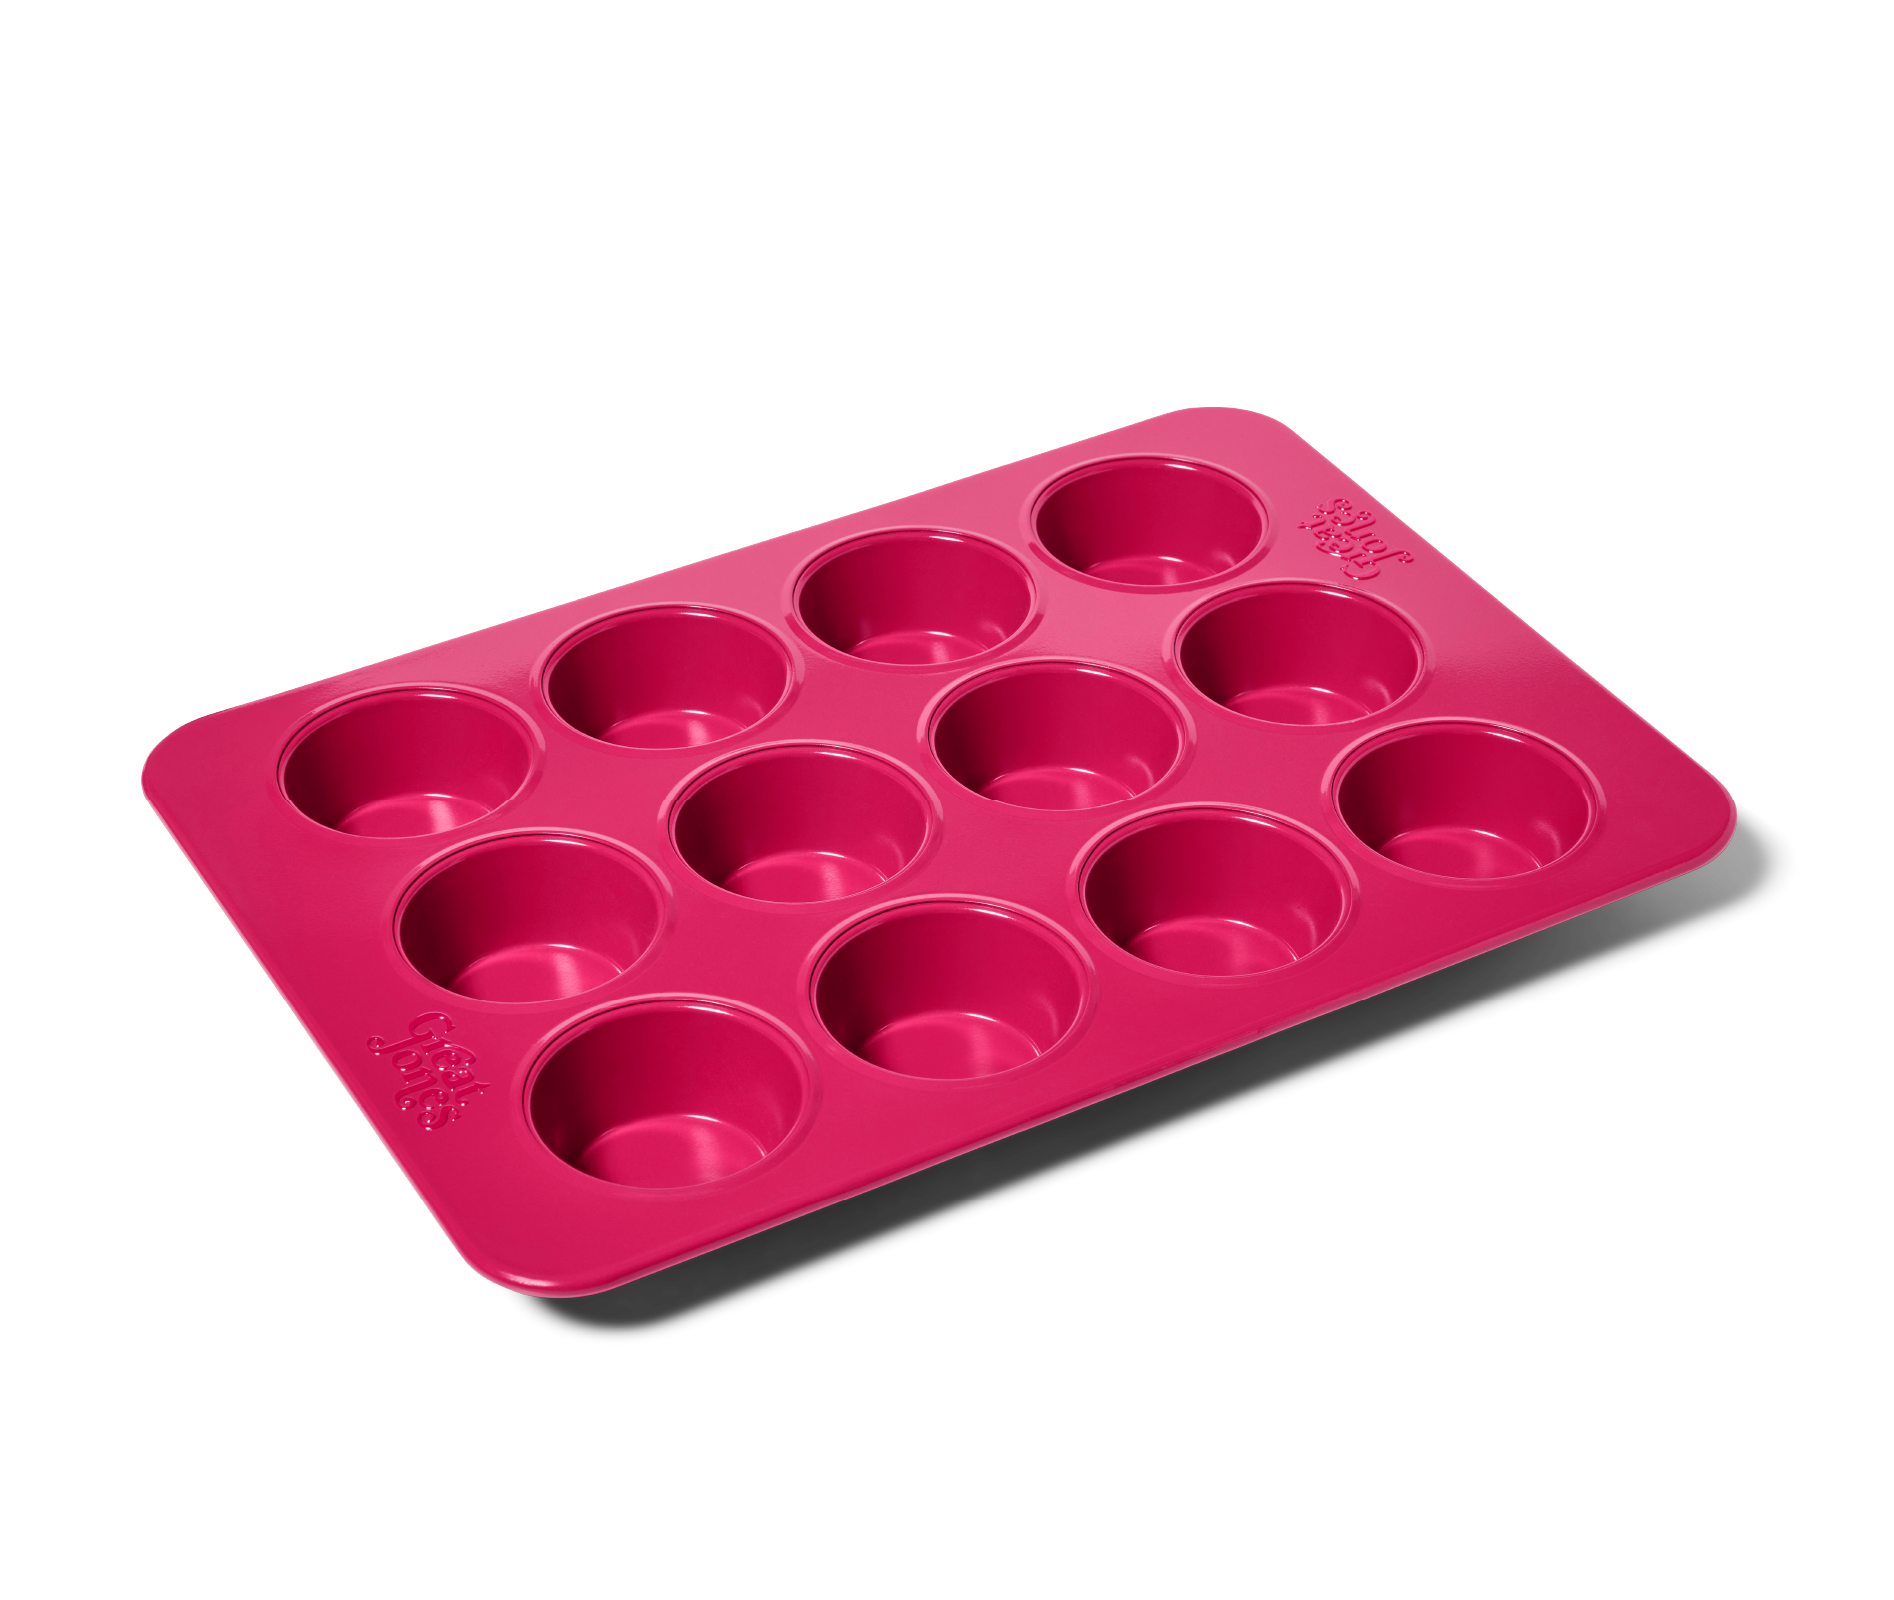 Z51 – CRM80 – 4C Non-Stick Big Crown Muffin Tray – 80 gms – 4in1